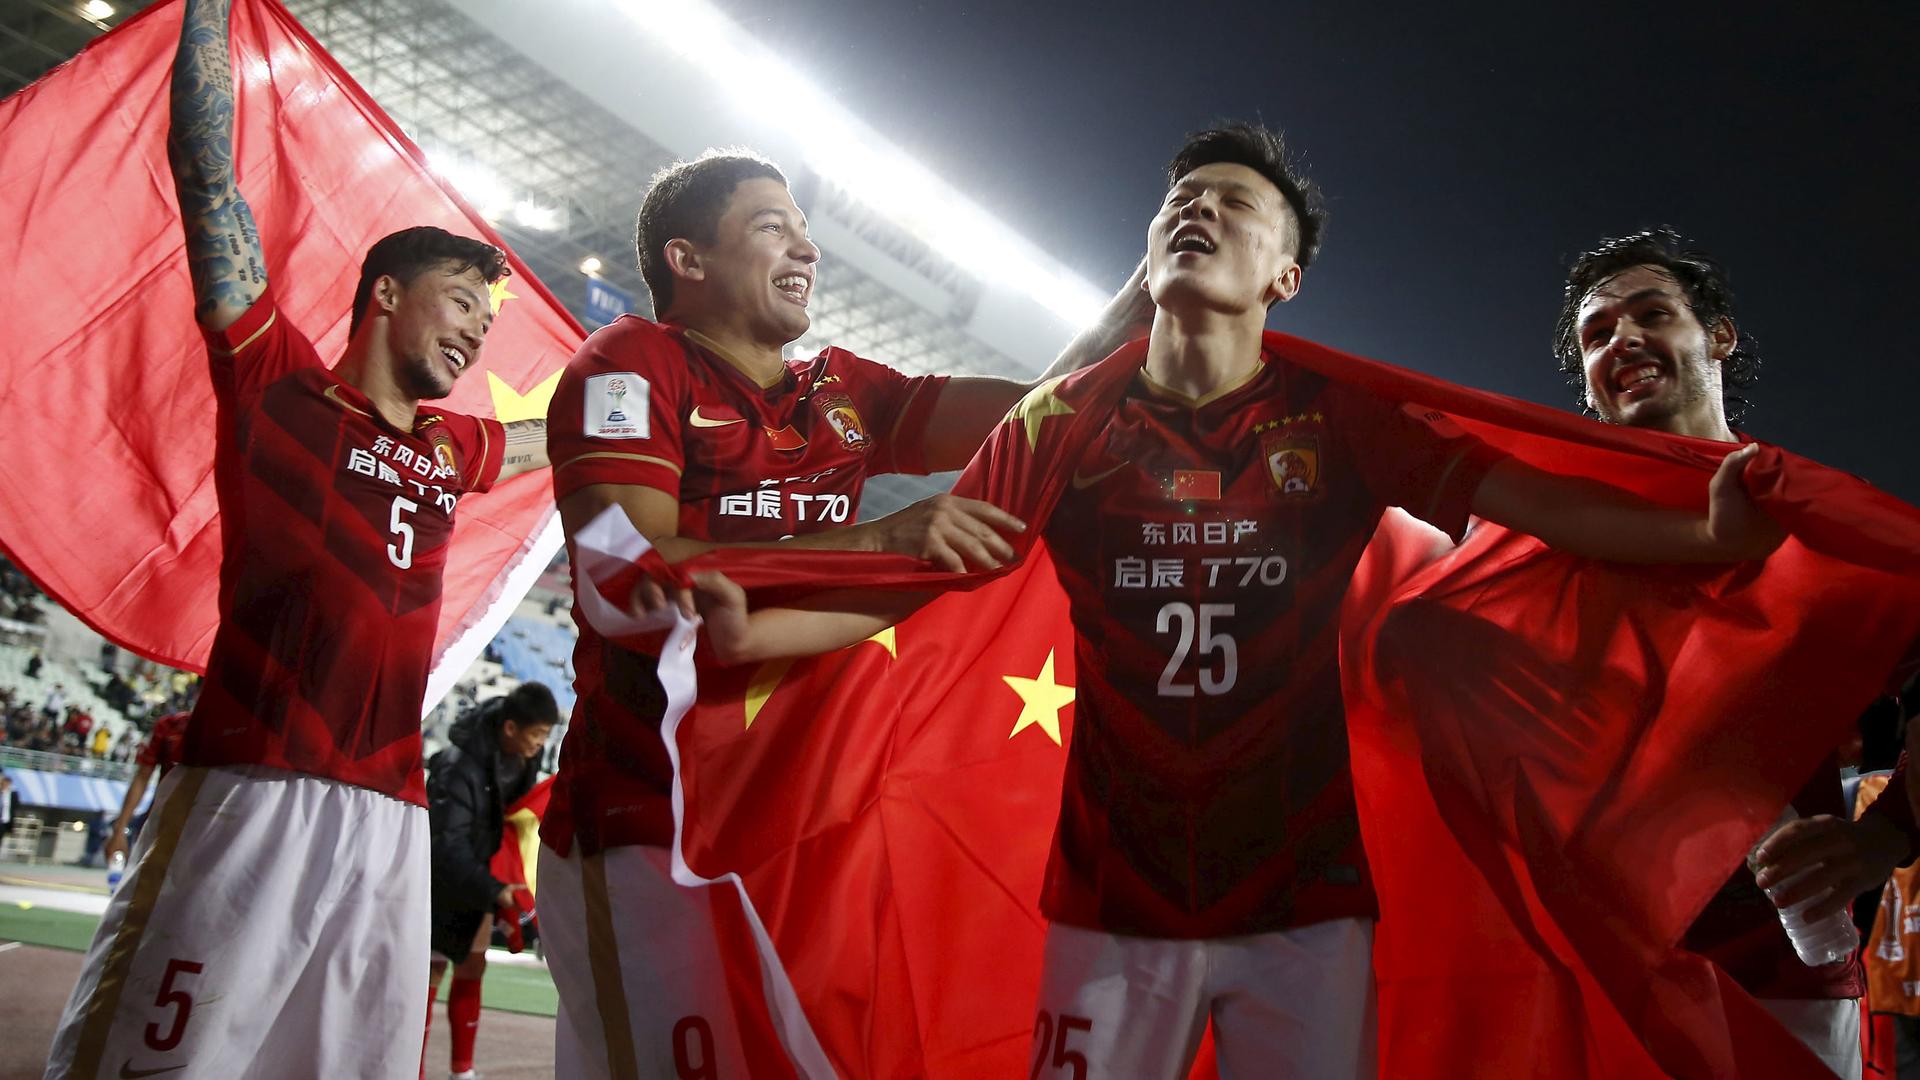 Zou Zheng (25) of China's Guangzhou Evergrande holds Chinese national flag as he celebrates with teammates after winning their Club World Cup quarter-final soccer match against Mexico's Club America during in Osaka, western Japan, December 13, 2015.